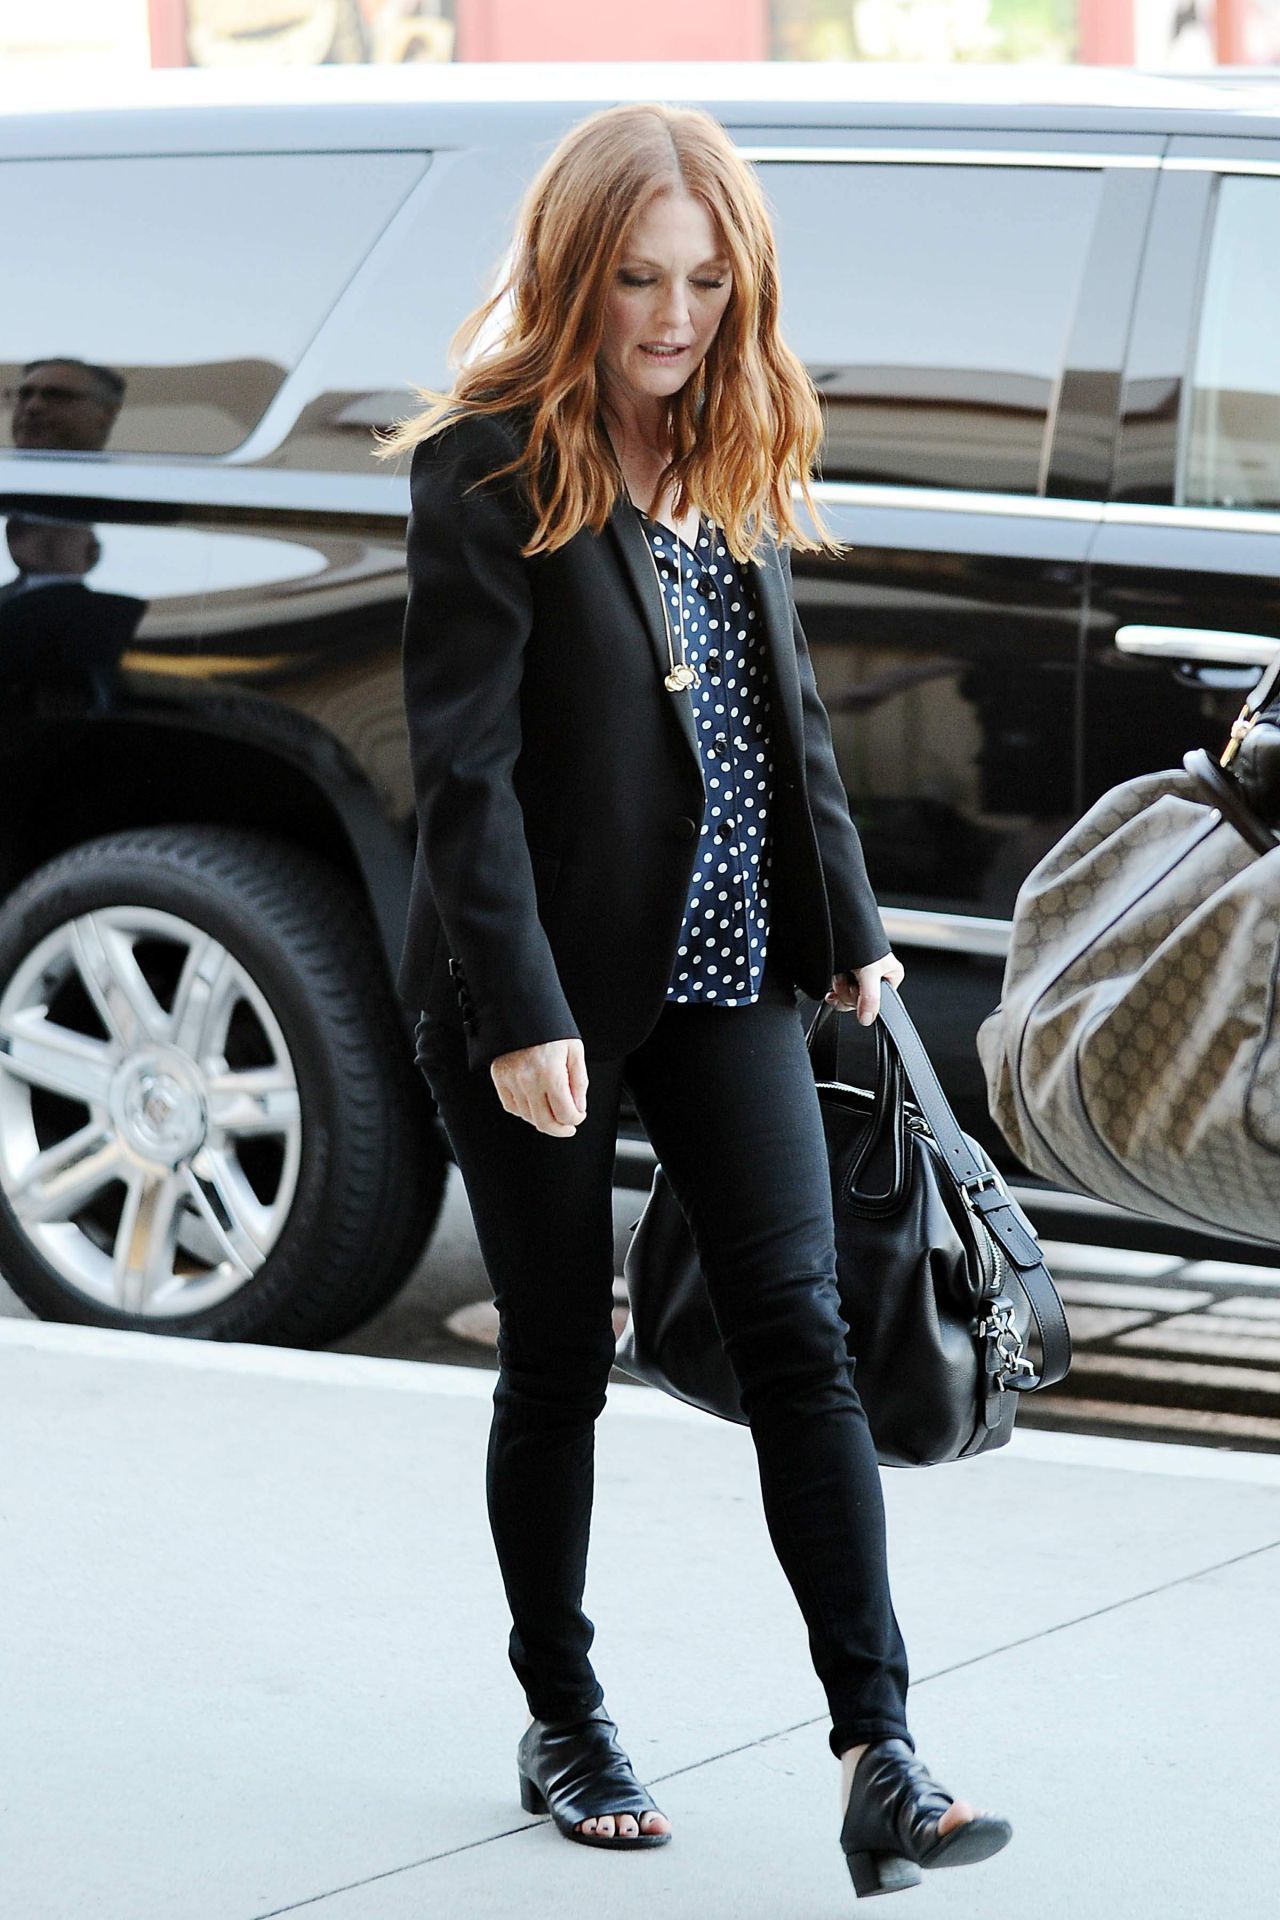 Black Balenciaga City bag and Swedish Hasbeens boots worn by Julianne Moore